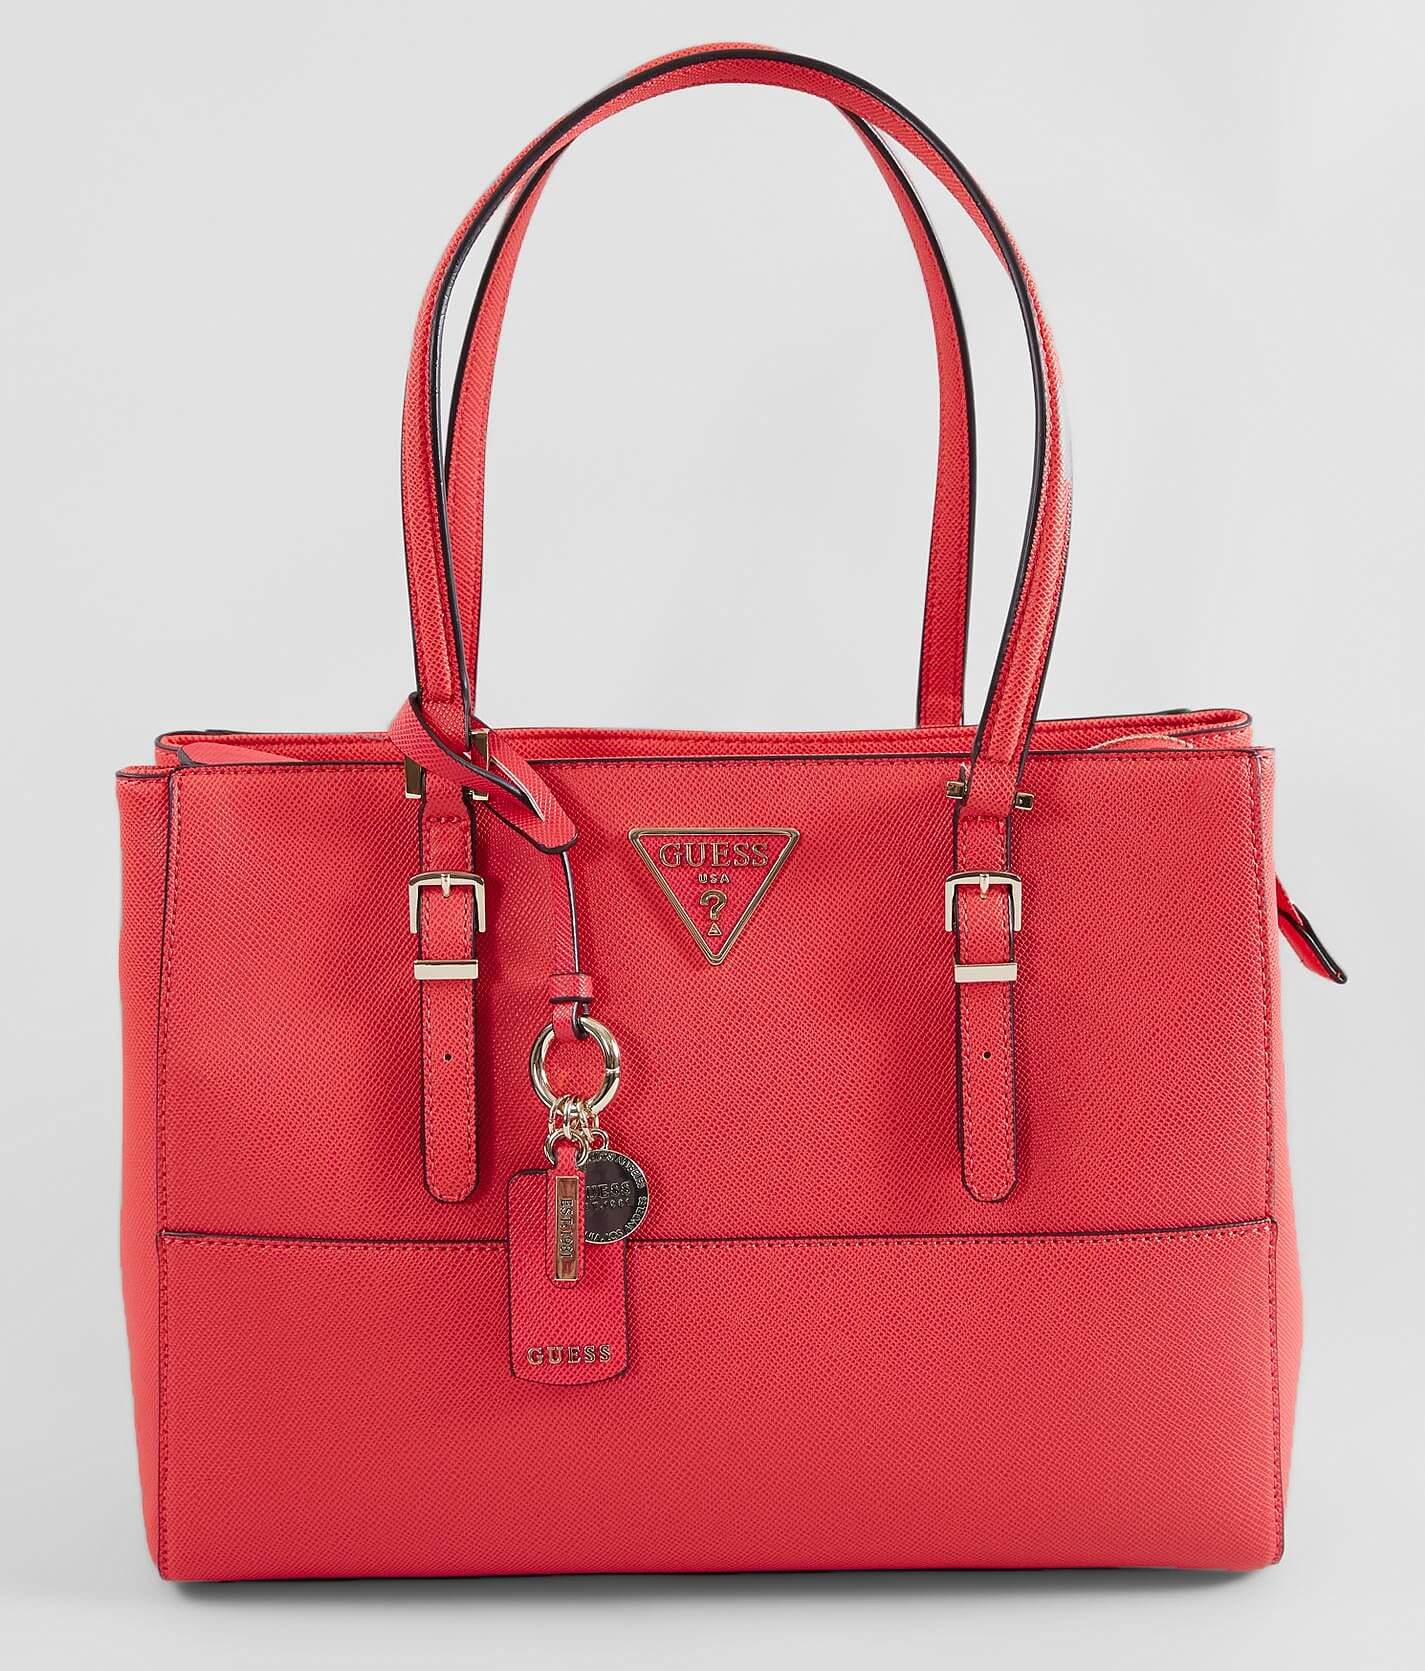 GUESS CARYS LOGO SATCHEL, GUESS Style: #VG740306